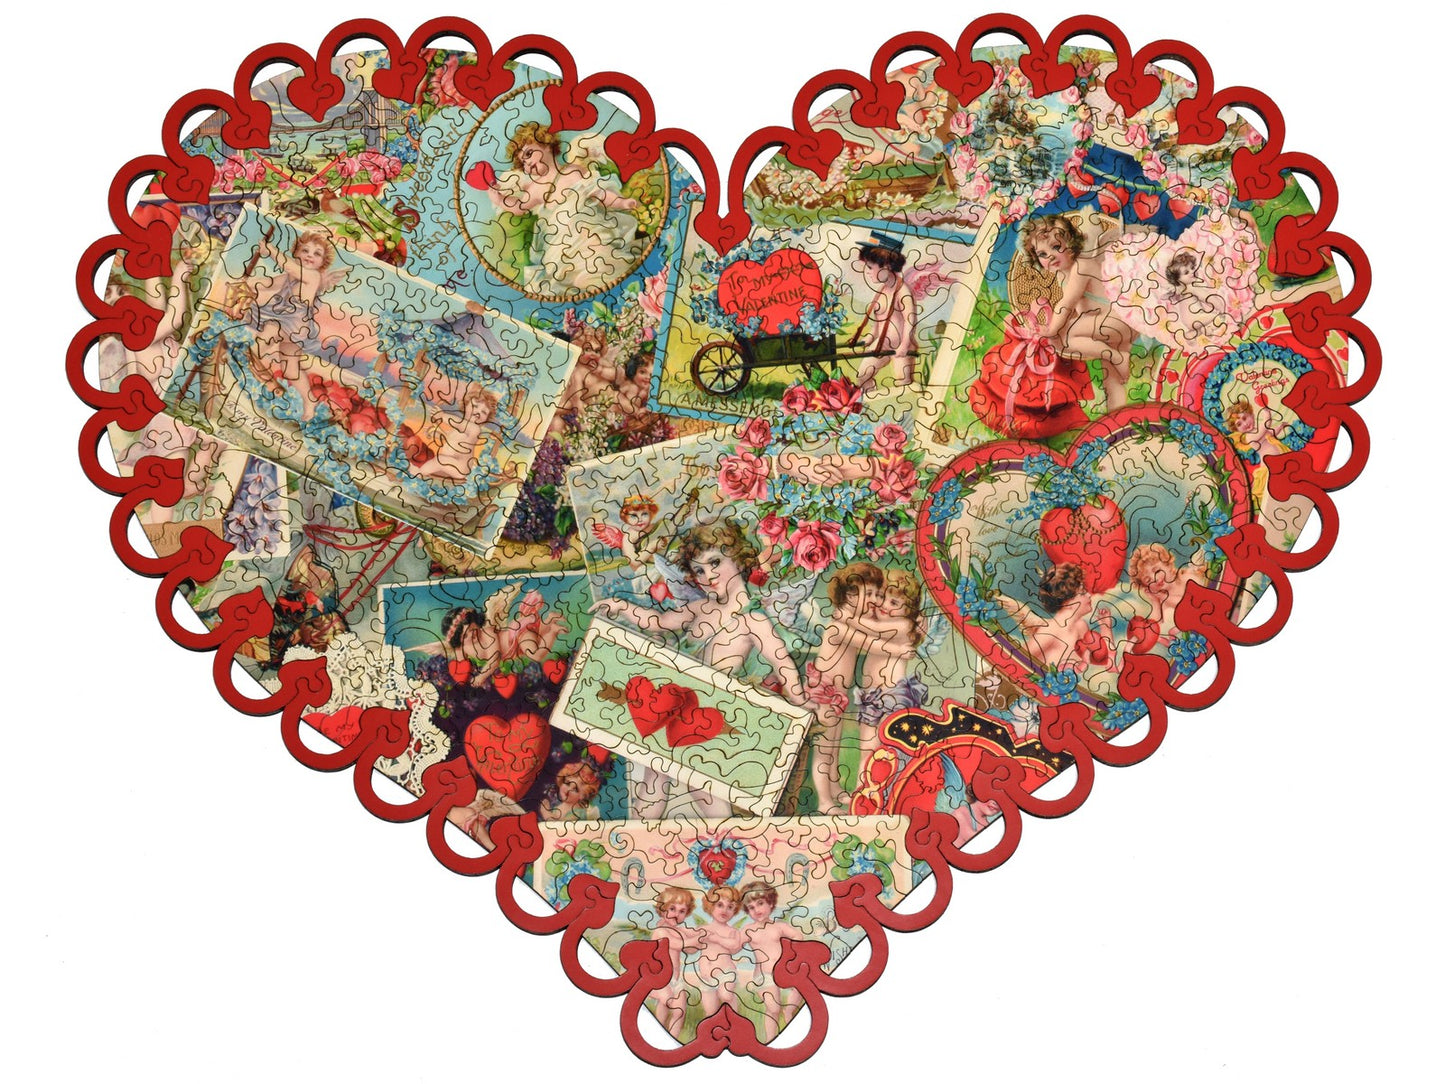 The front of the puzzle Valentine Collection Special Edition, which shows a collage of vintage valentines postcards, with a decorative border.